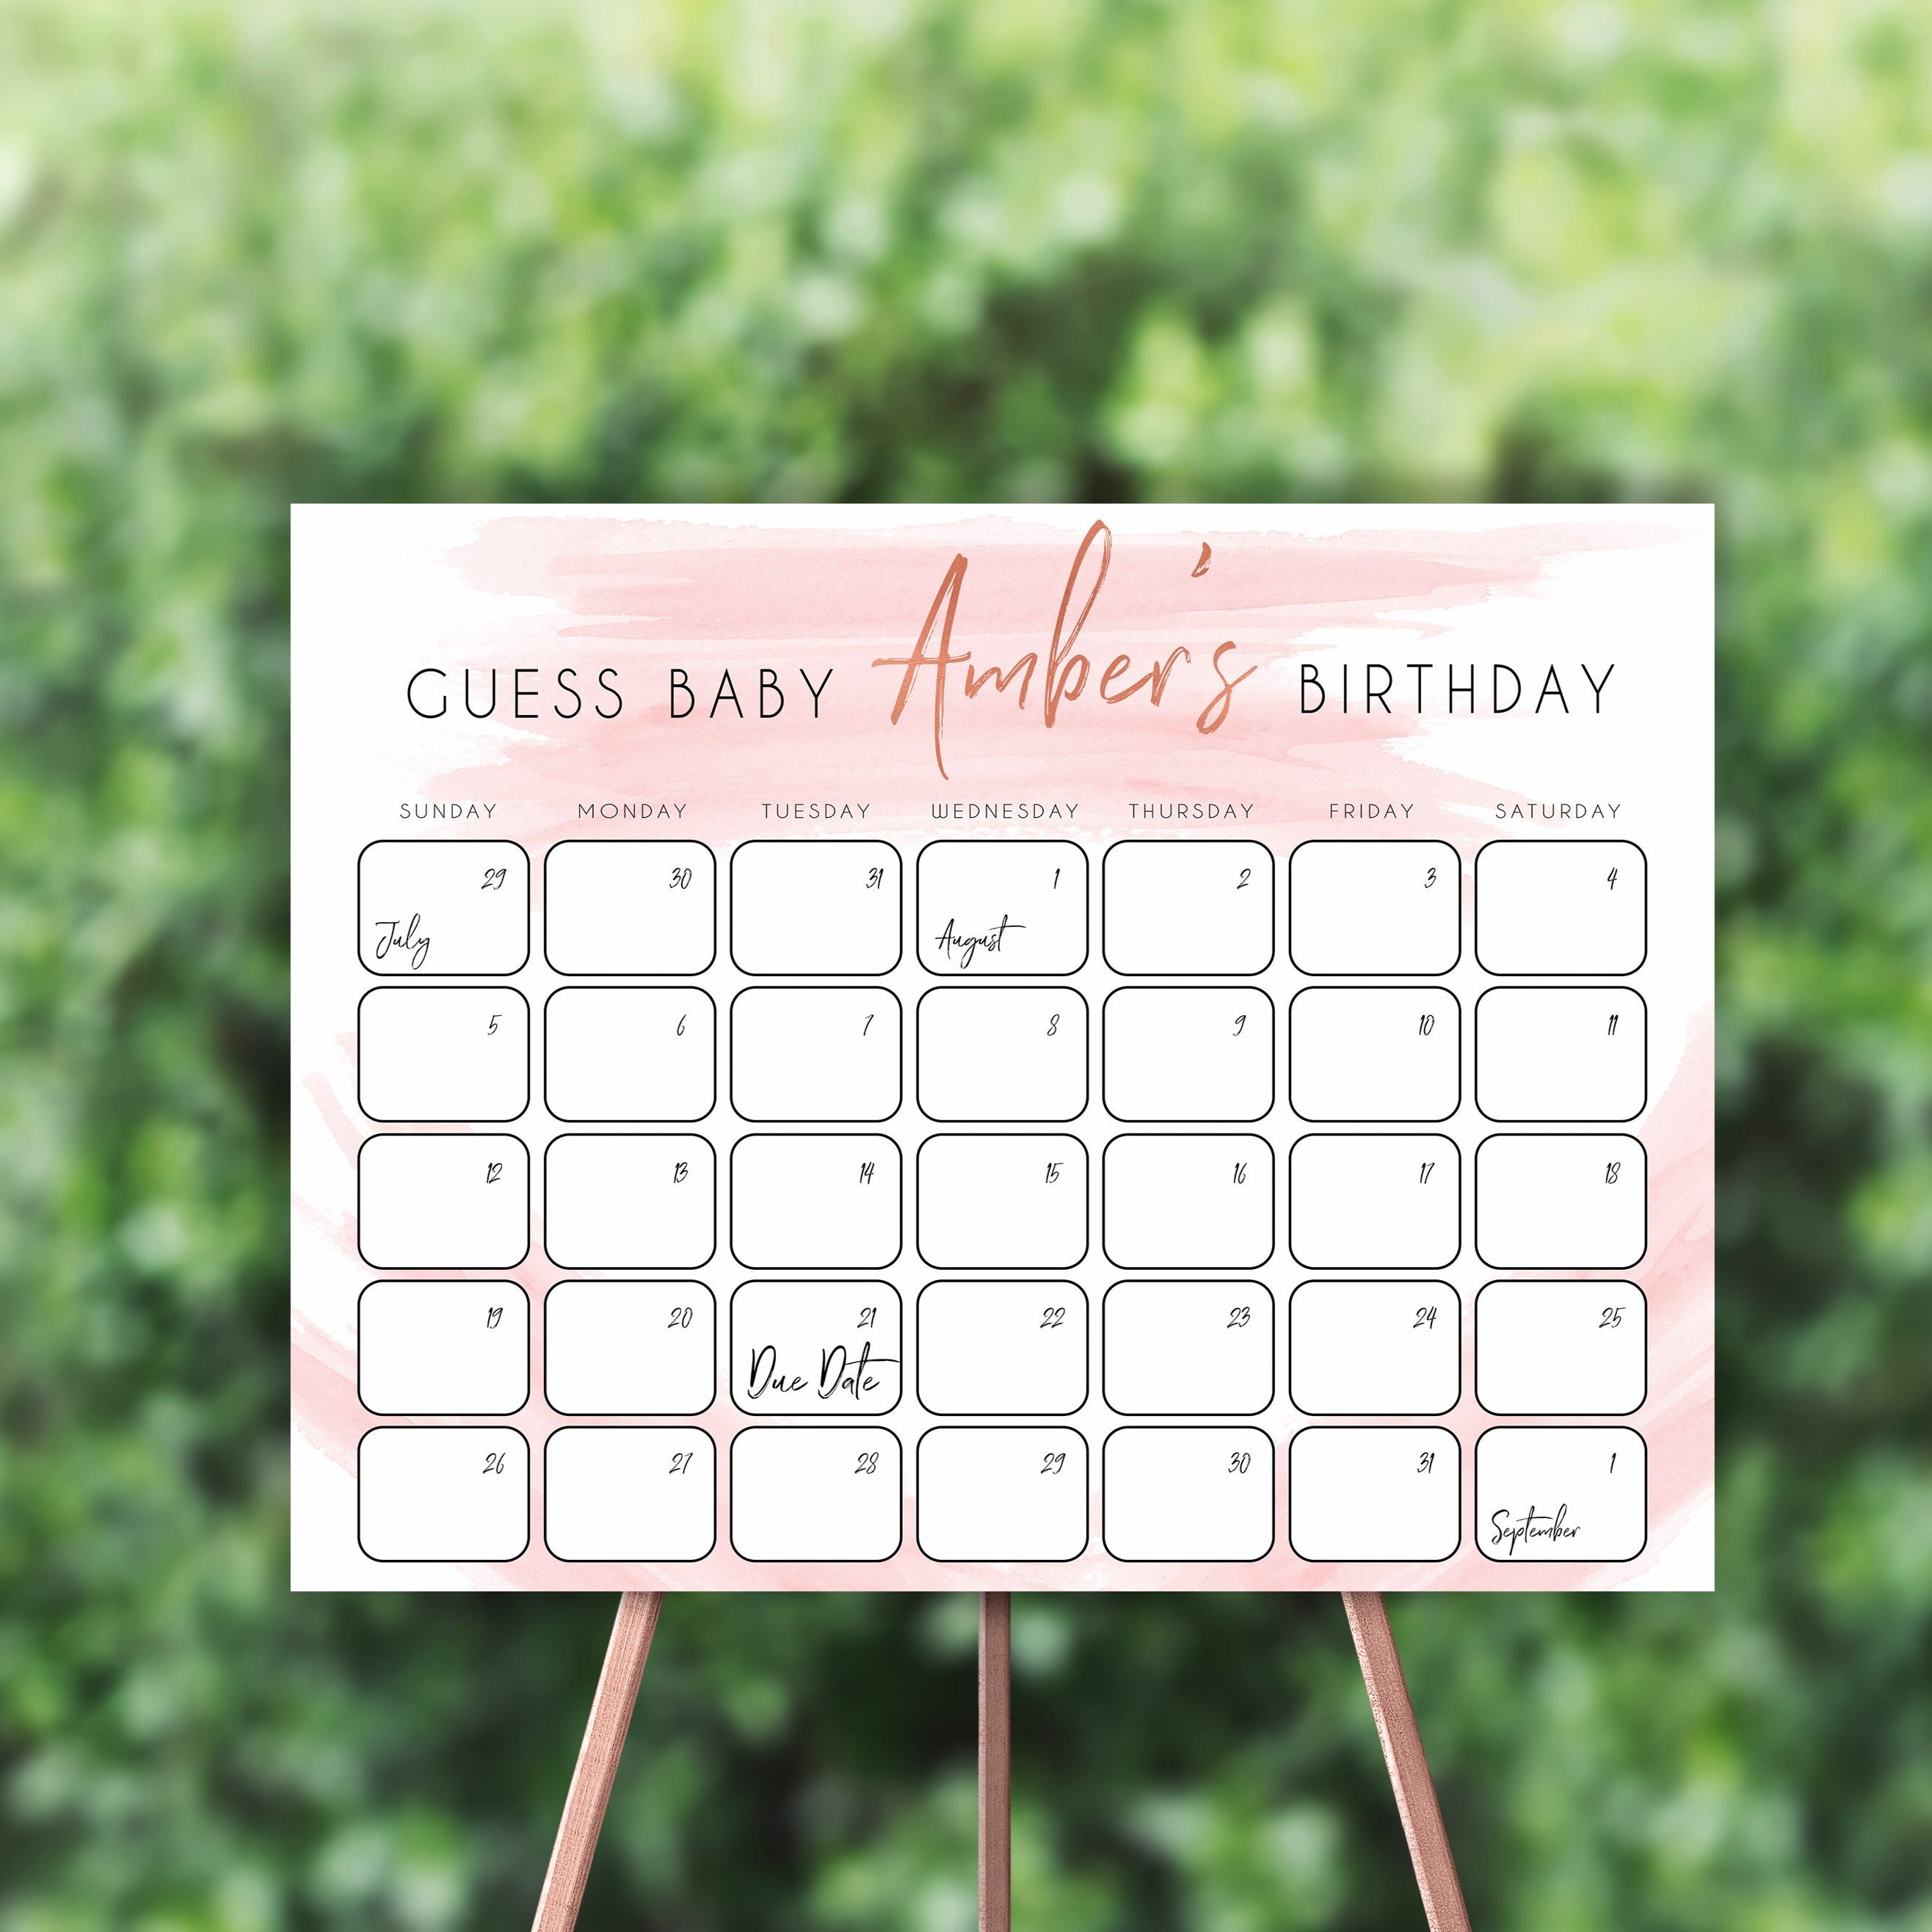 Guess The Baby Birthday Game, Printable baby shower games, baby birthday predictions game, fun baby shower games, baby shower games ideas